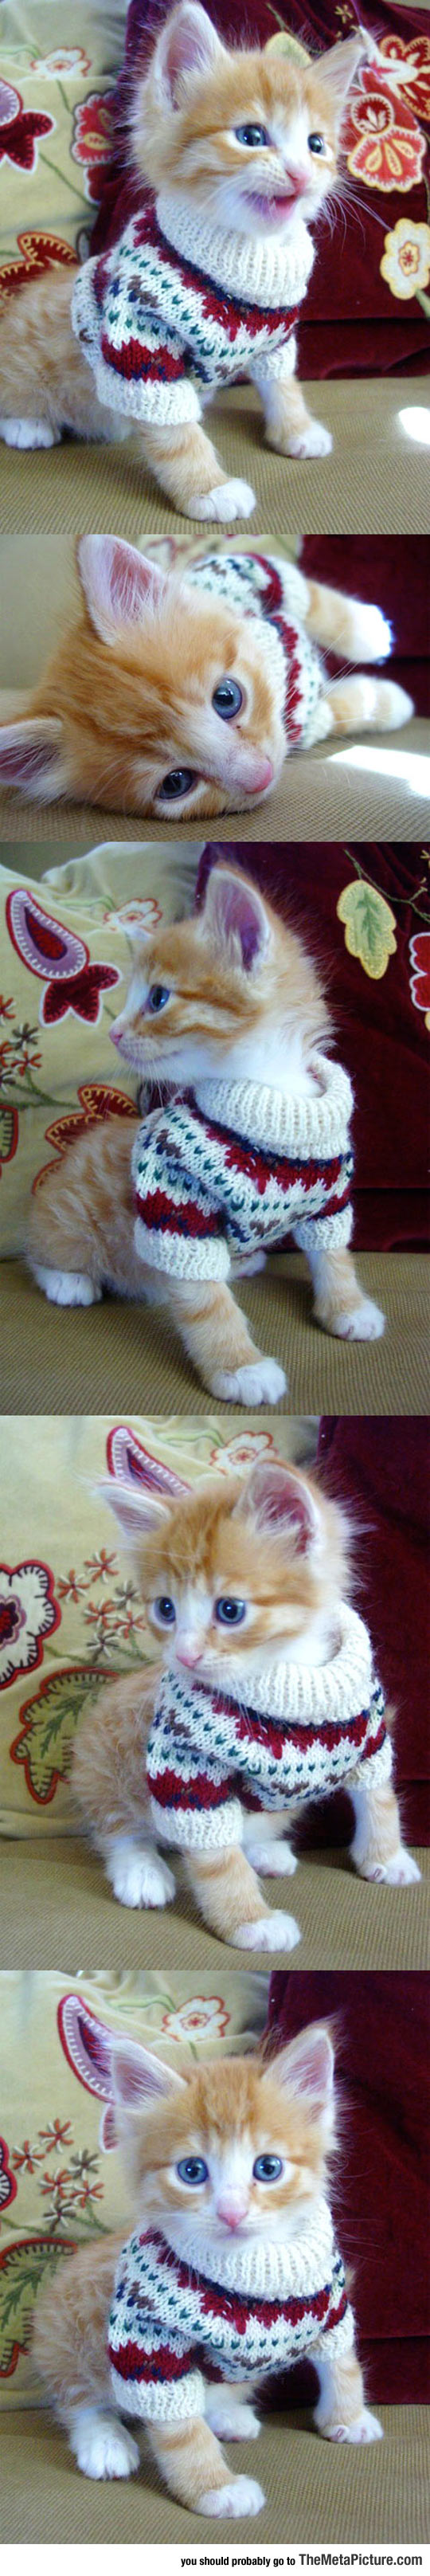 Kitty In A Sweater